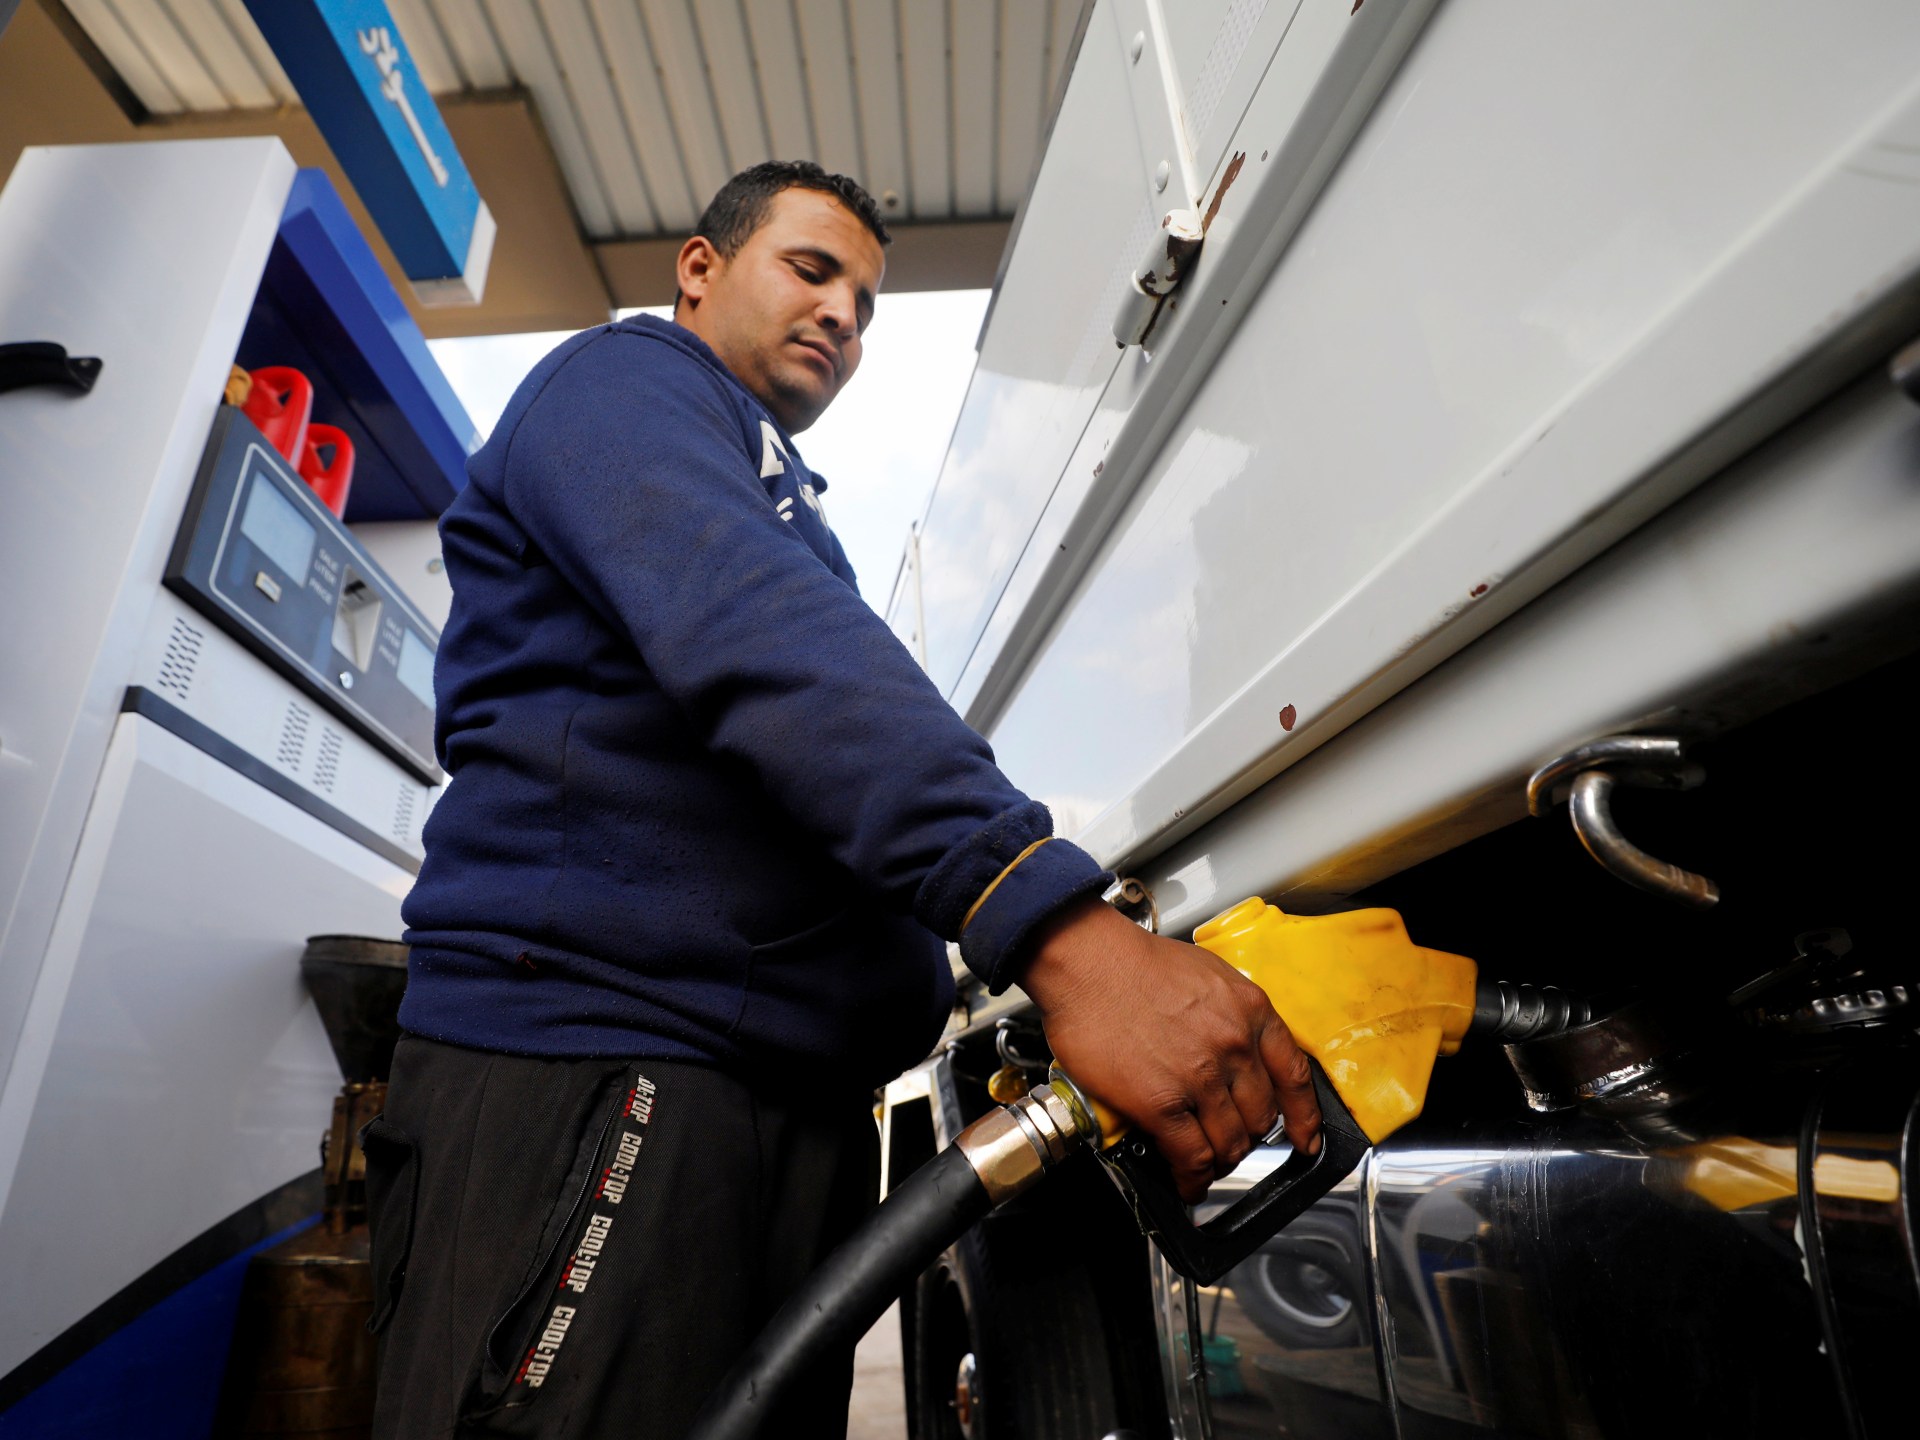 Egypt raises fuel prices to lock in IMF loan tranche | Business and Economy News [Video]